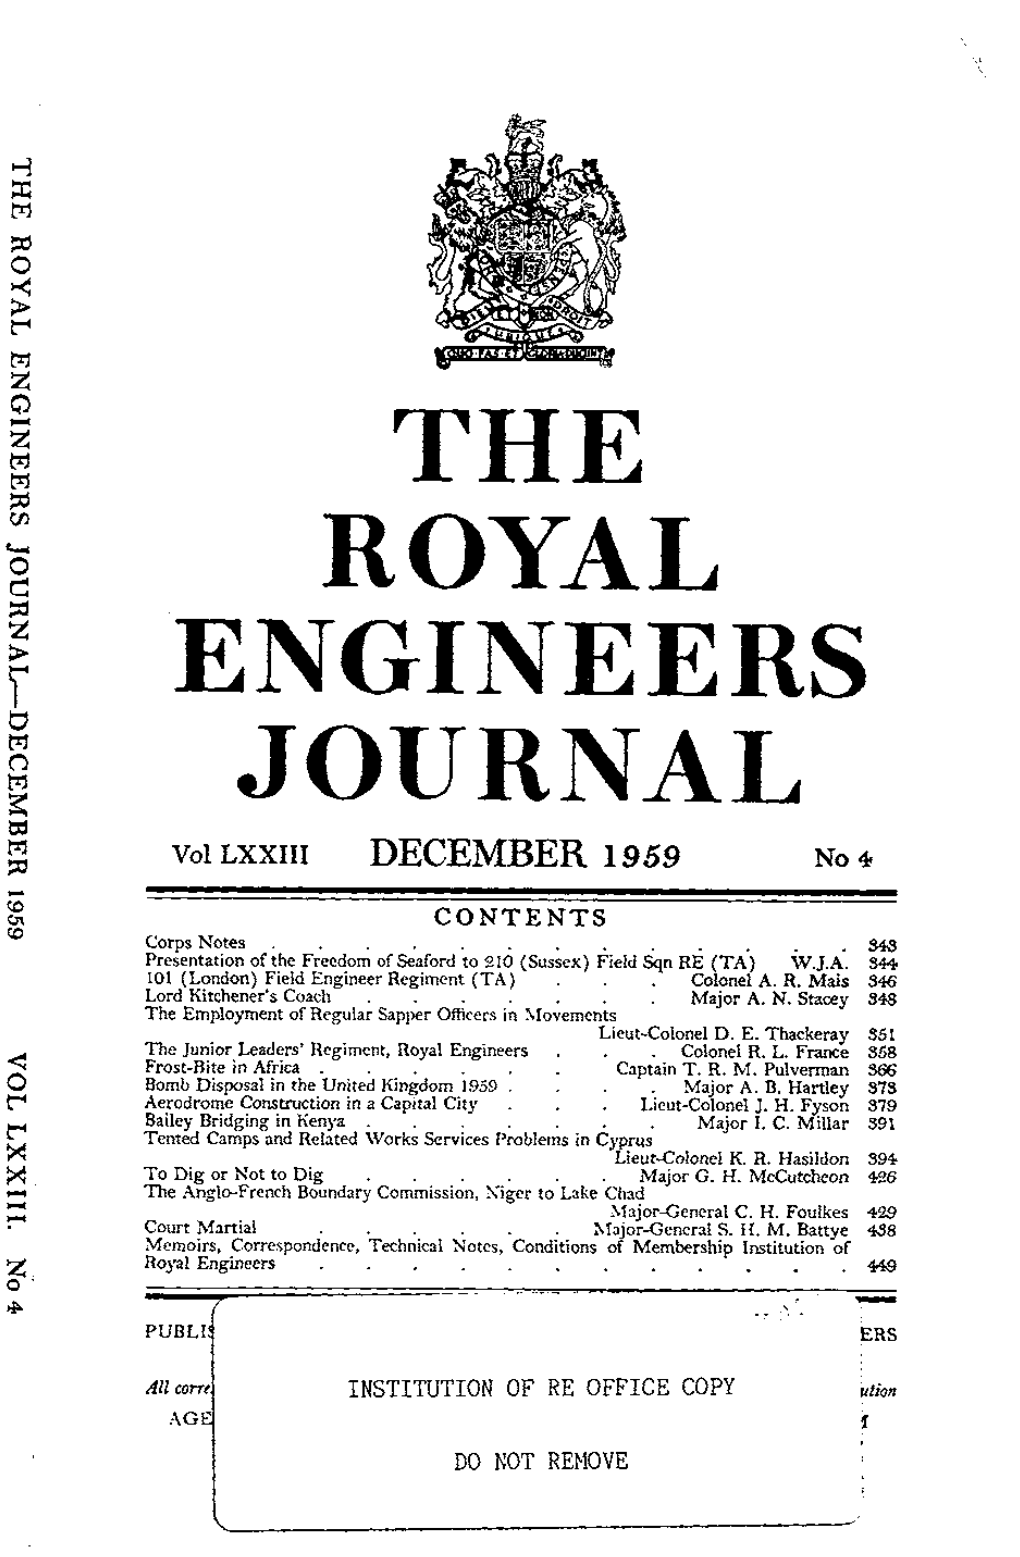 THE ROYAL ENGINEERS JOURNAL Vol LXXIII DECEMBER 1959 No 4